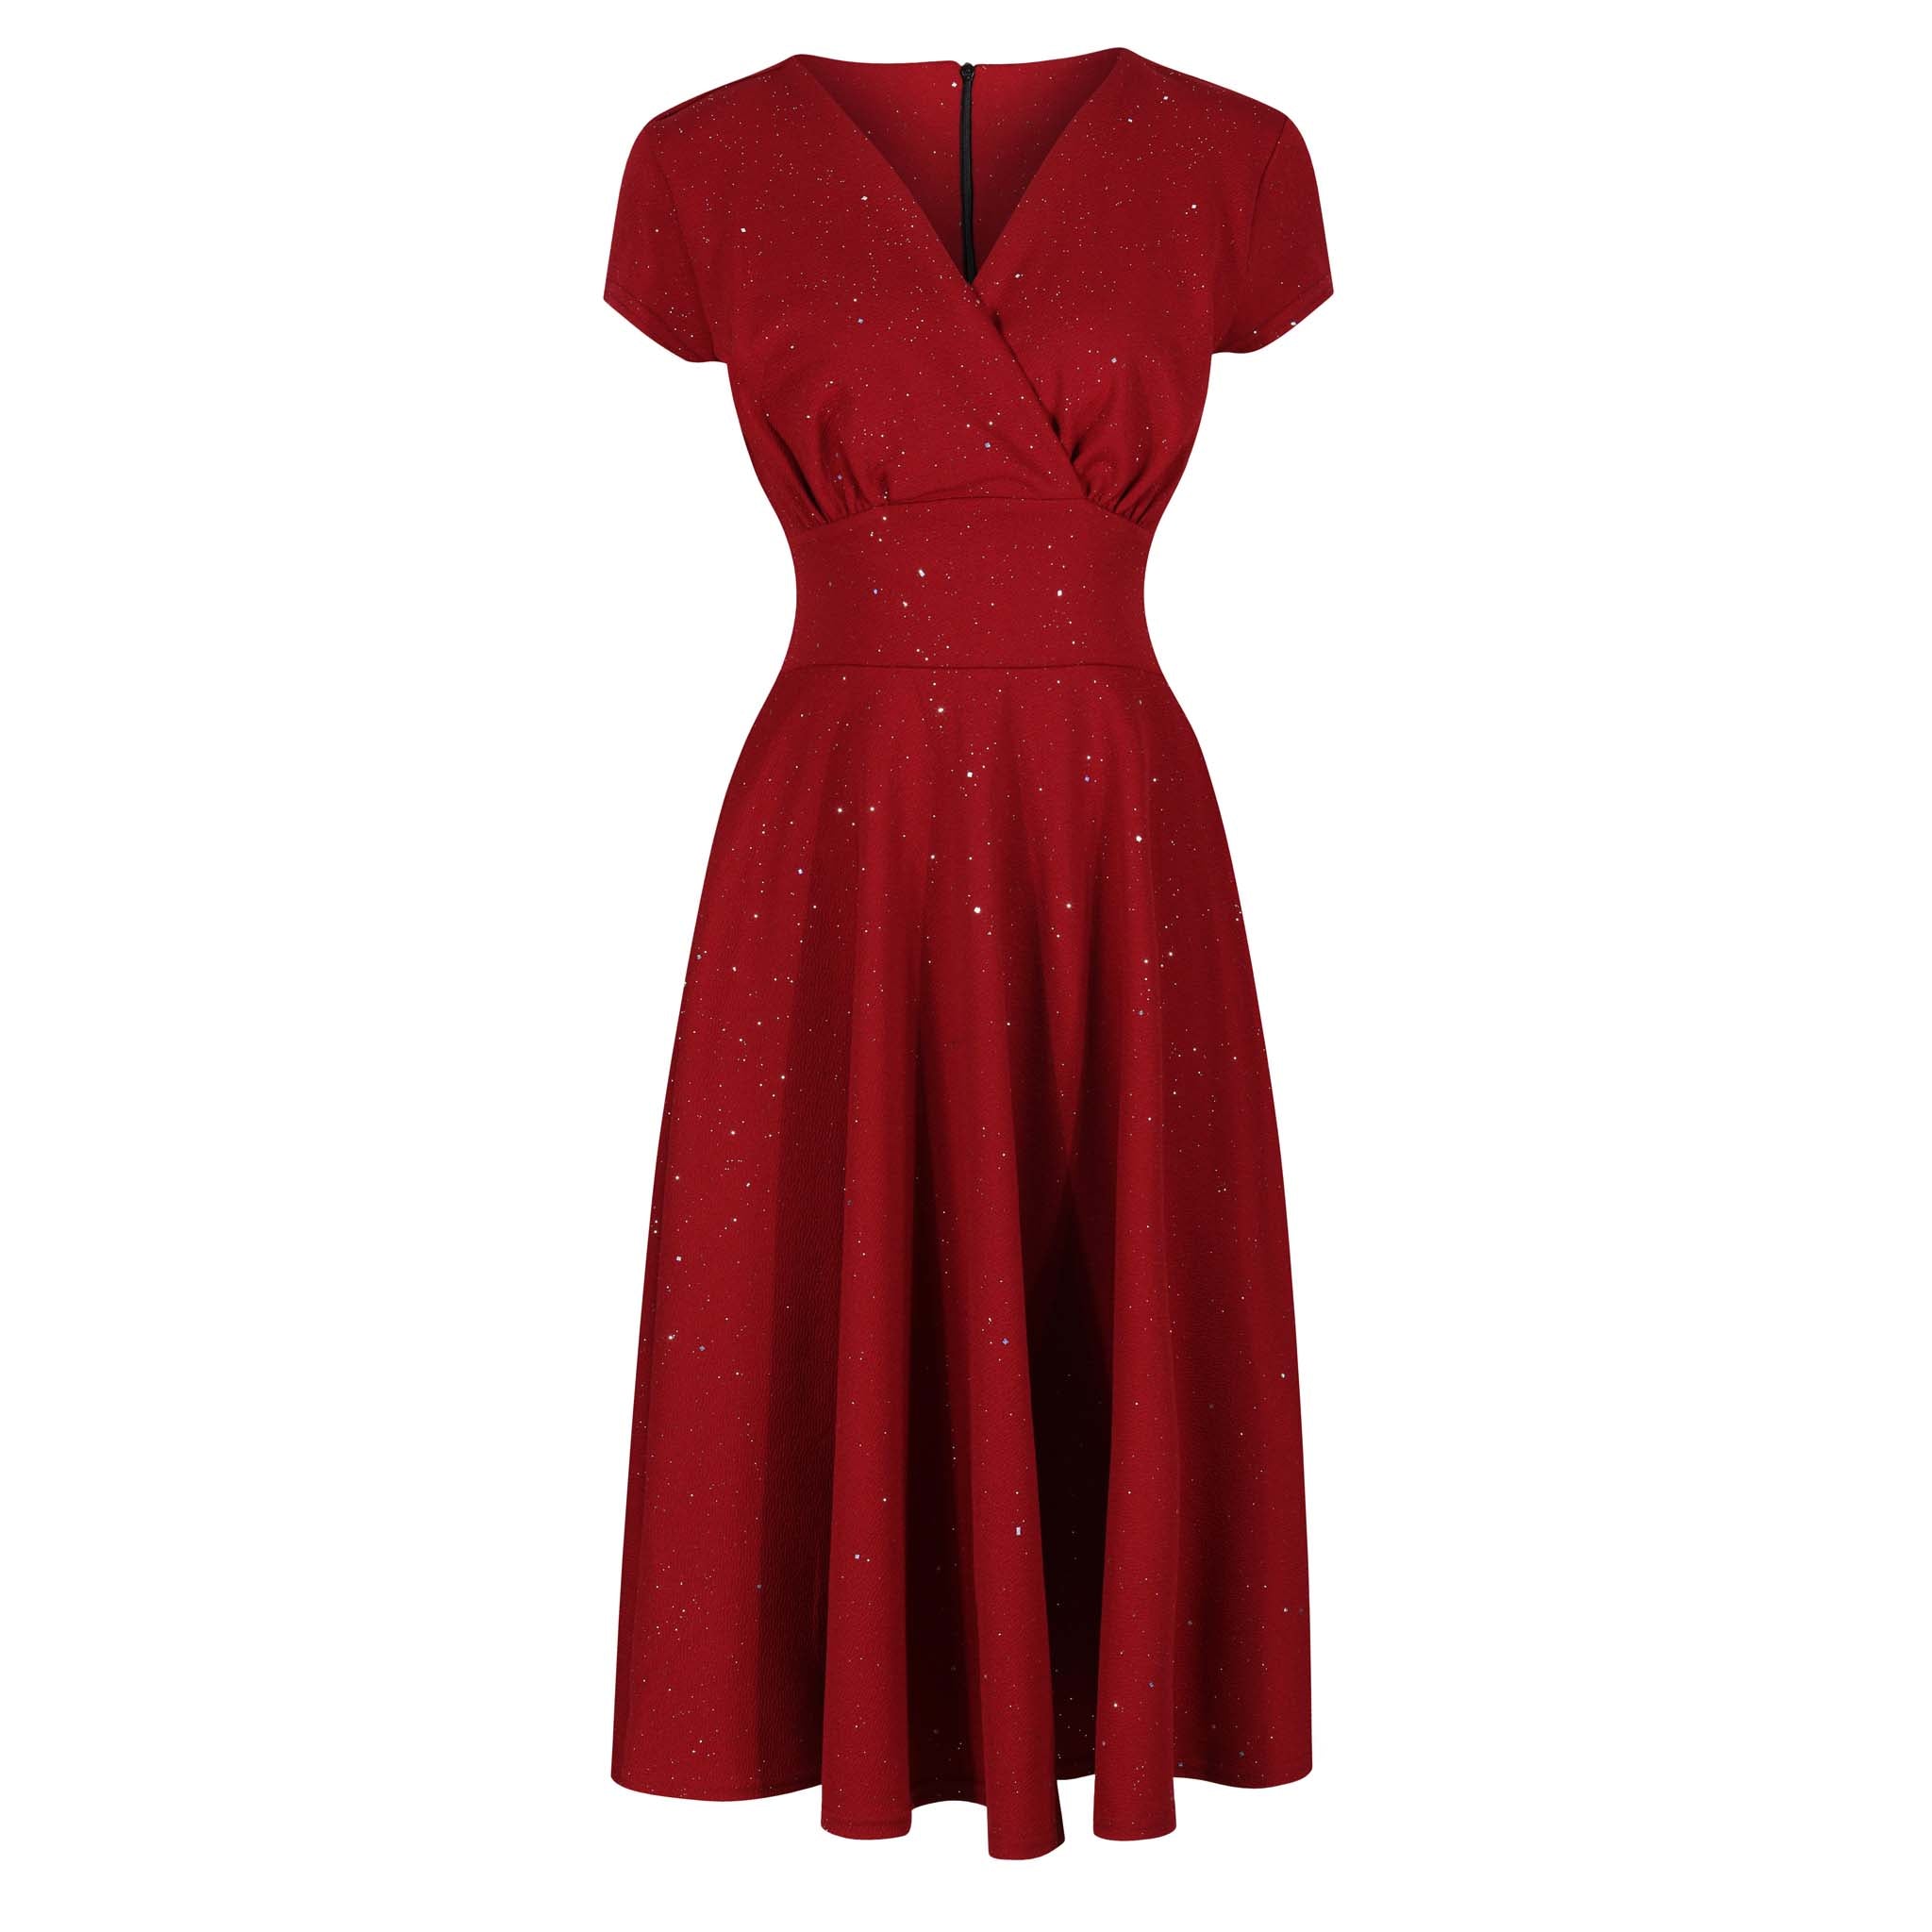 Wine Red & Sparkly Glitter A Line Crossover Top Capped Sleeve Tea Swing Dress